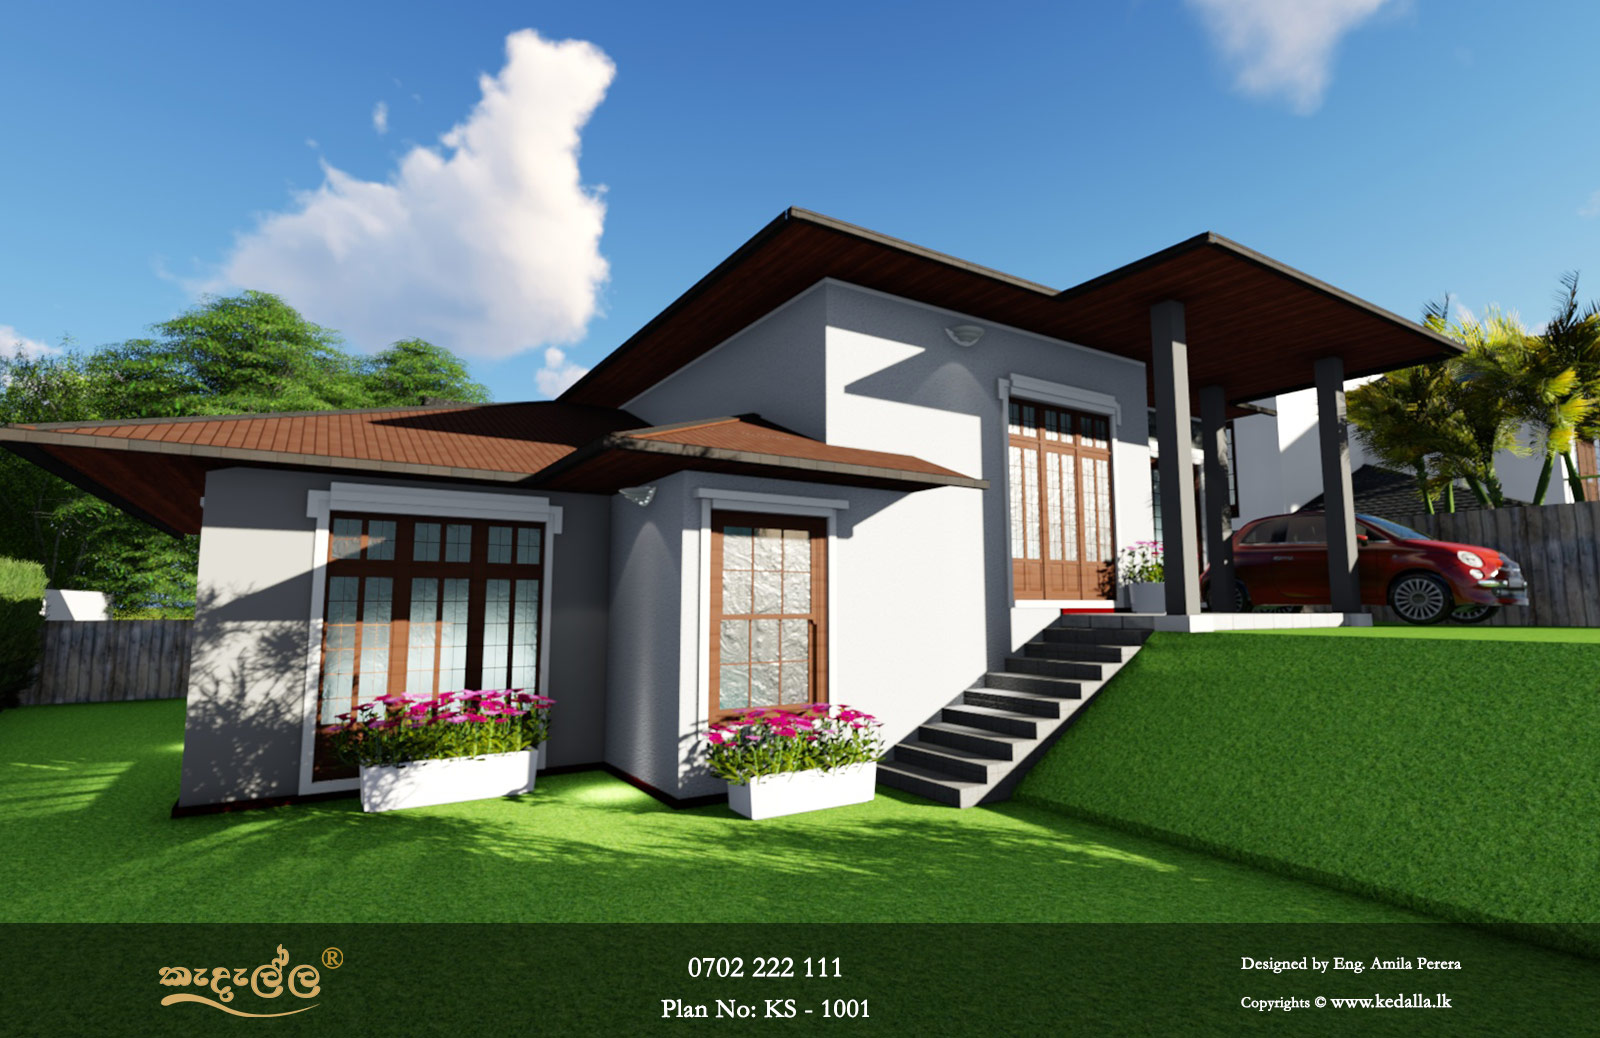 An ideal house design to suit your budget. Beautiful exterior & interior. Compact floor plan, inclusions, upgrades, facades and many more